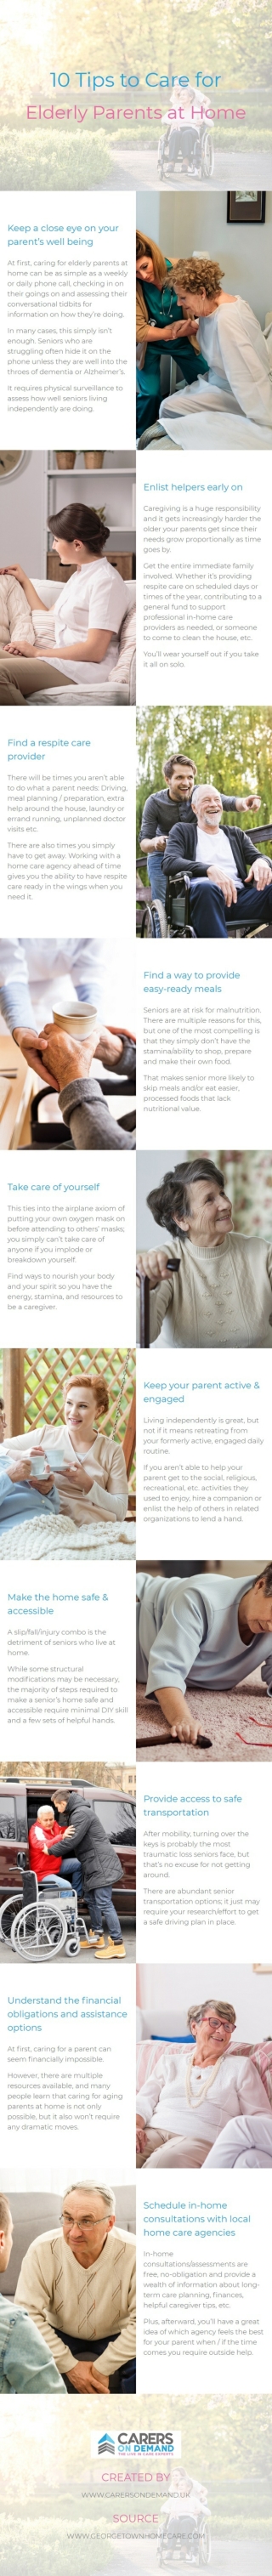 10 Tips to Care for Elderly Parents at Home